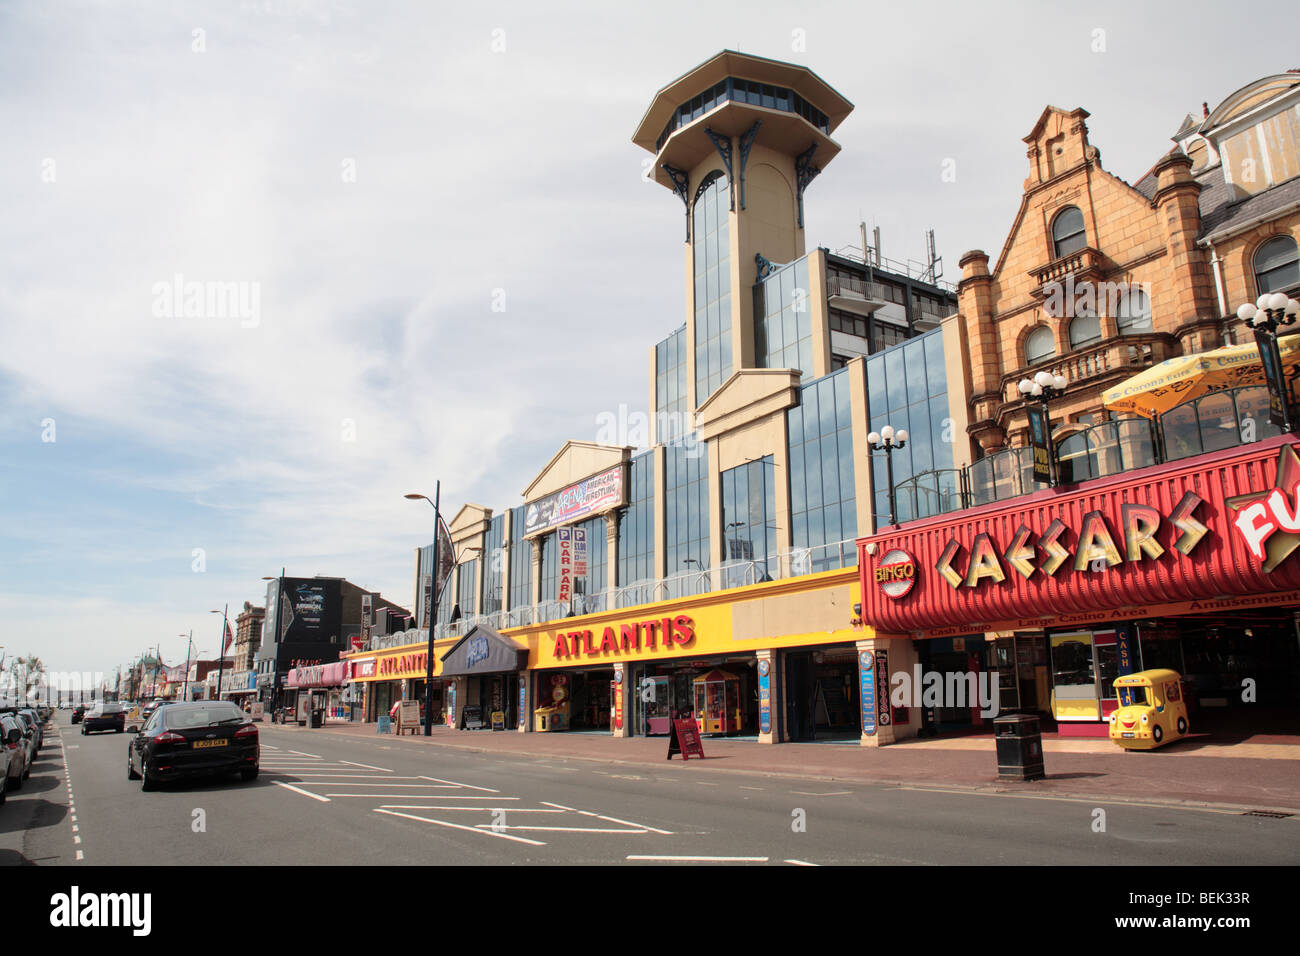 Viewing tower and amusement arcades, Great Yarmouth Stock Photo